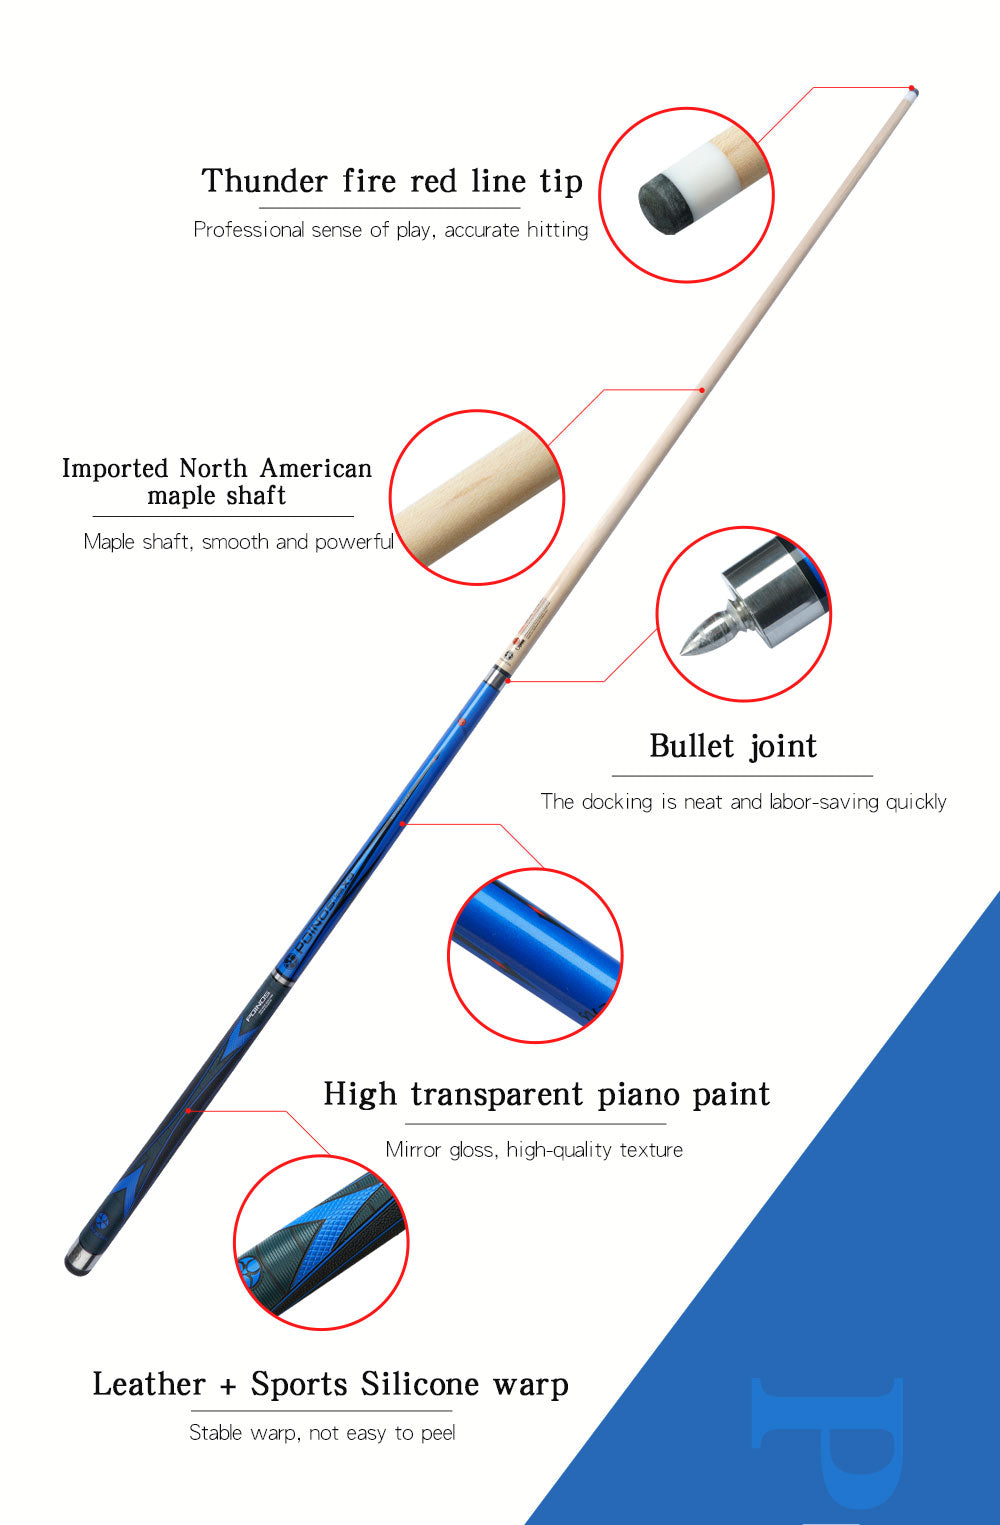 POINS AOLONG Billiard Pool Cue Maple Shaft 10/11.5/12.5mm Tip XTC Ferrule Bullet Quick Joint with Extension